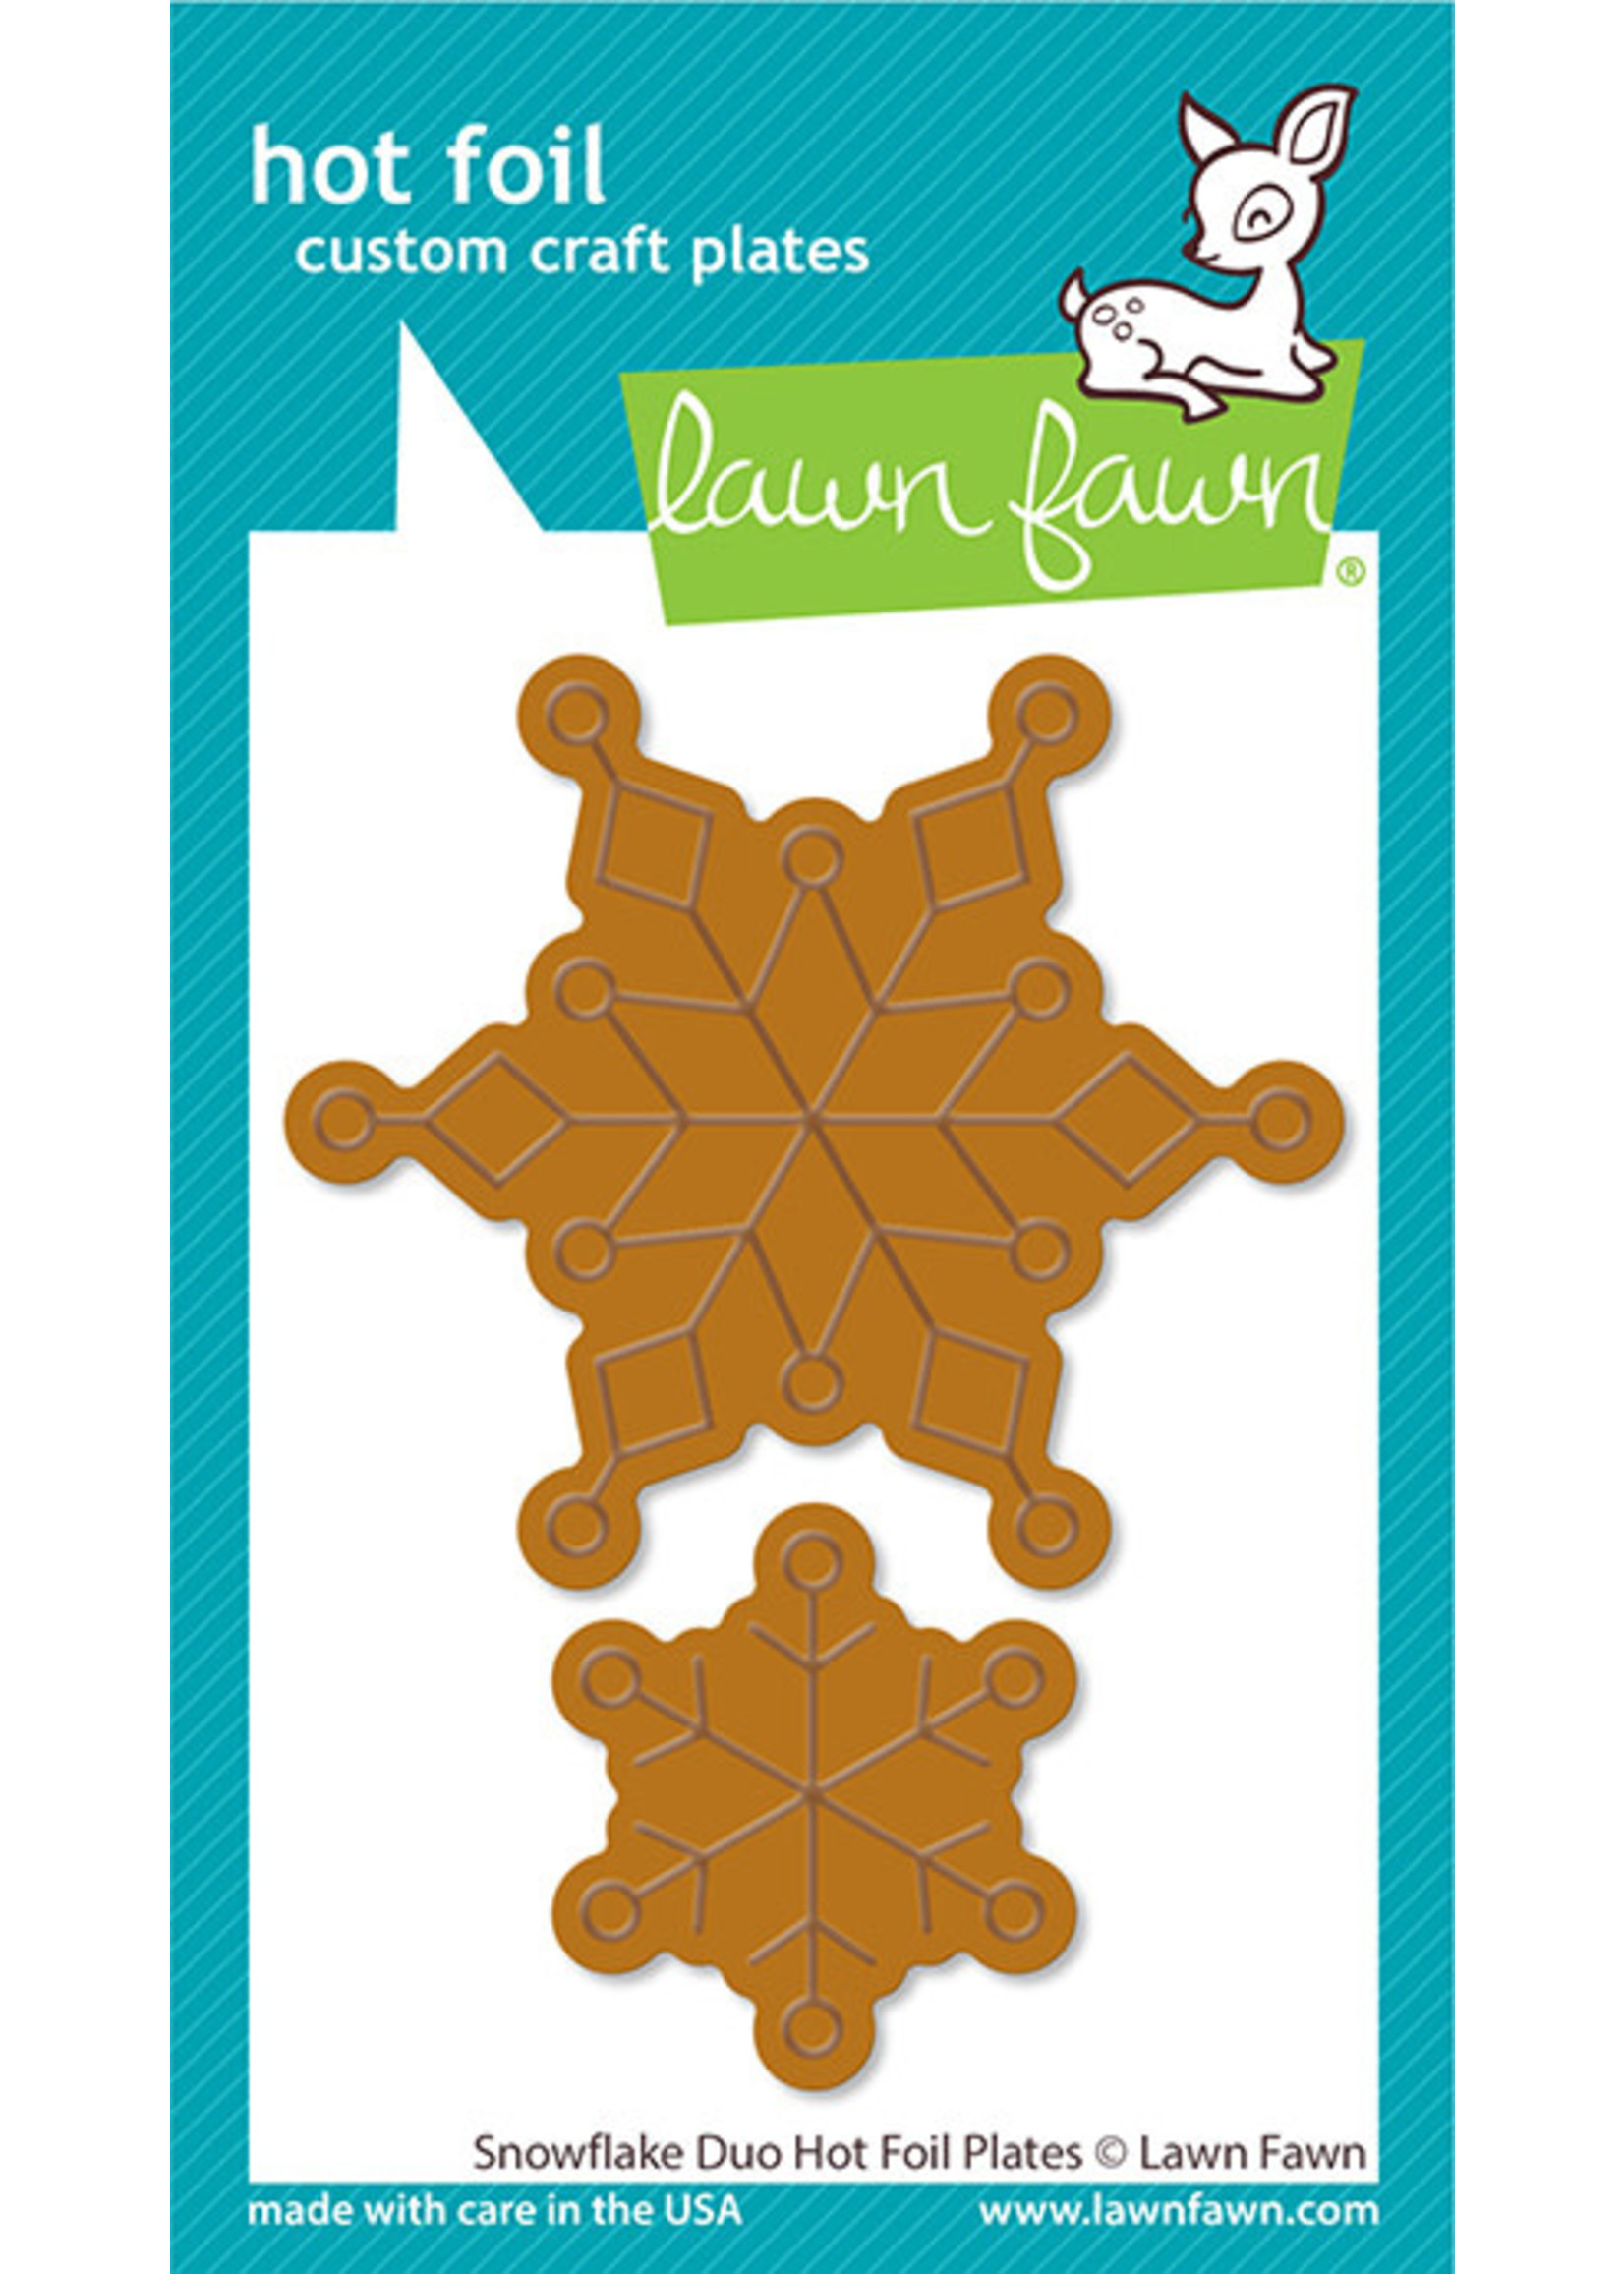 Lawn Fawn snowflake duo hot foil plates